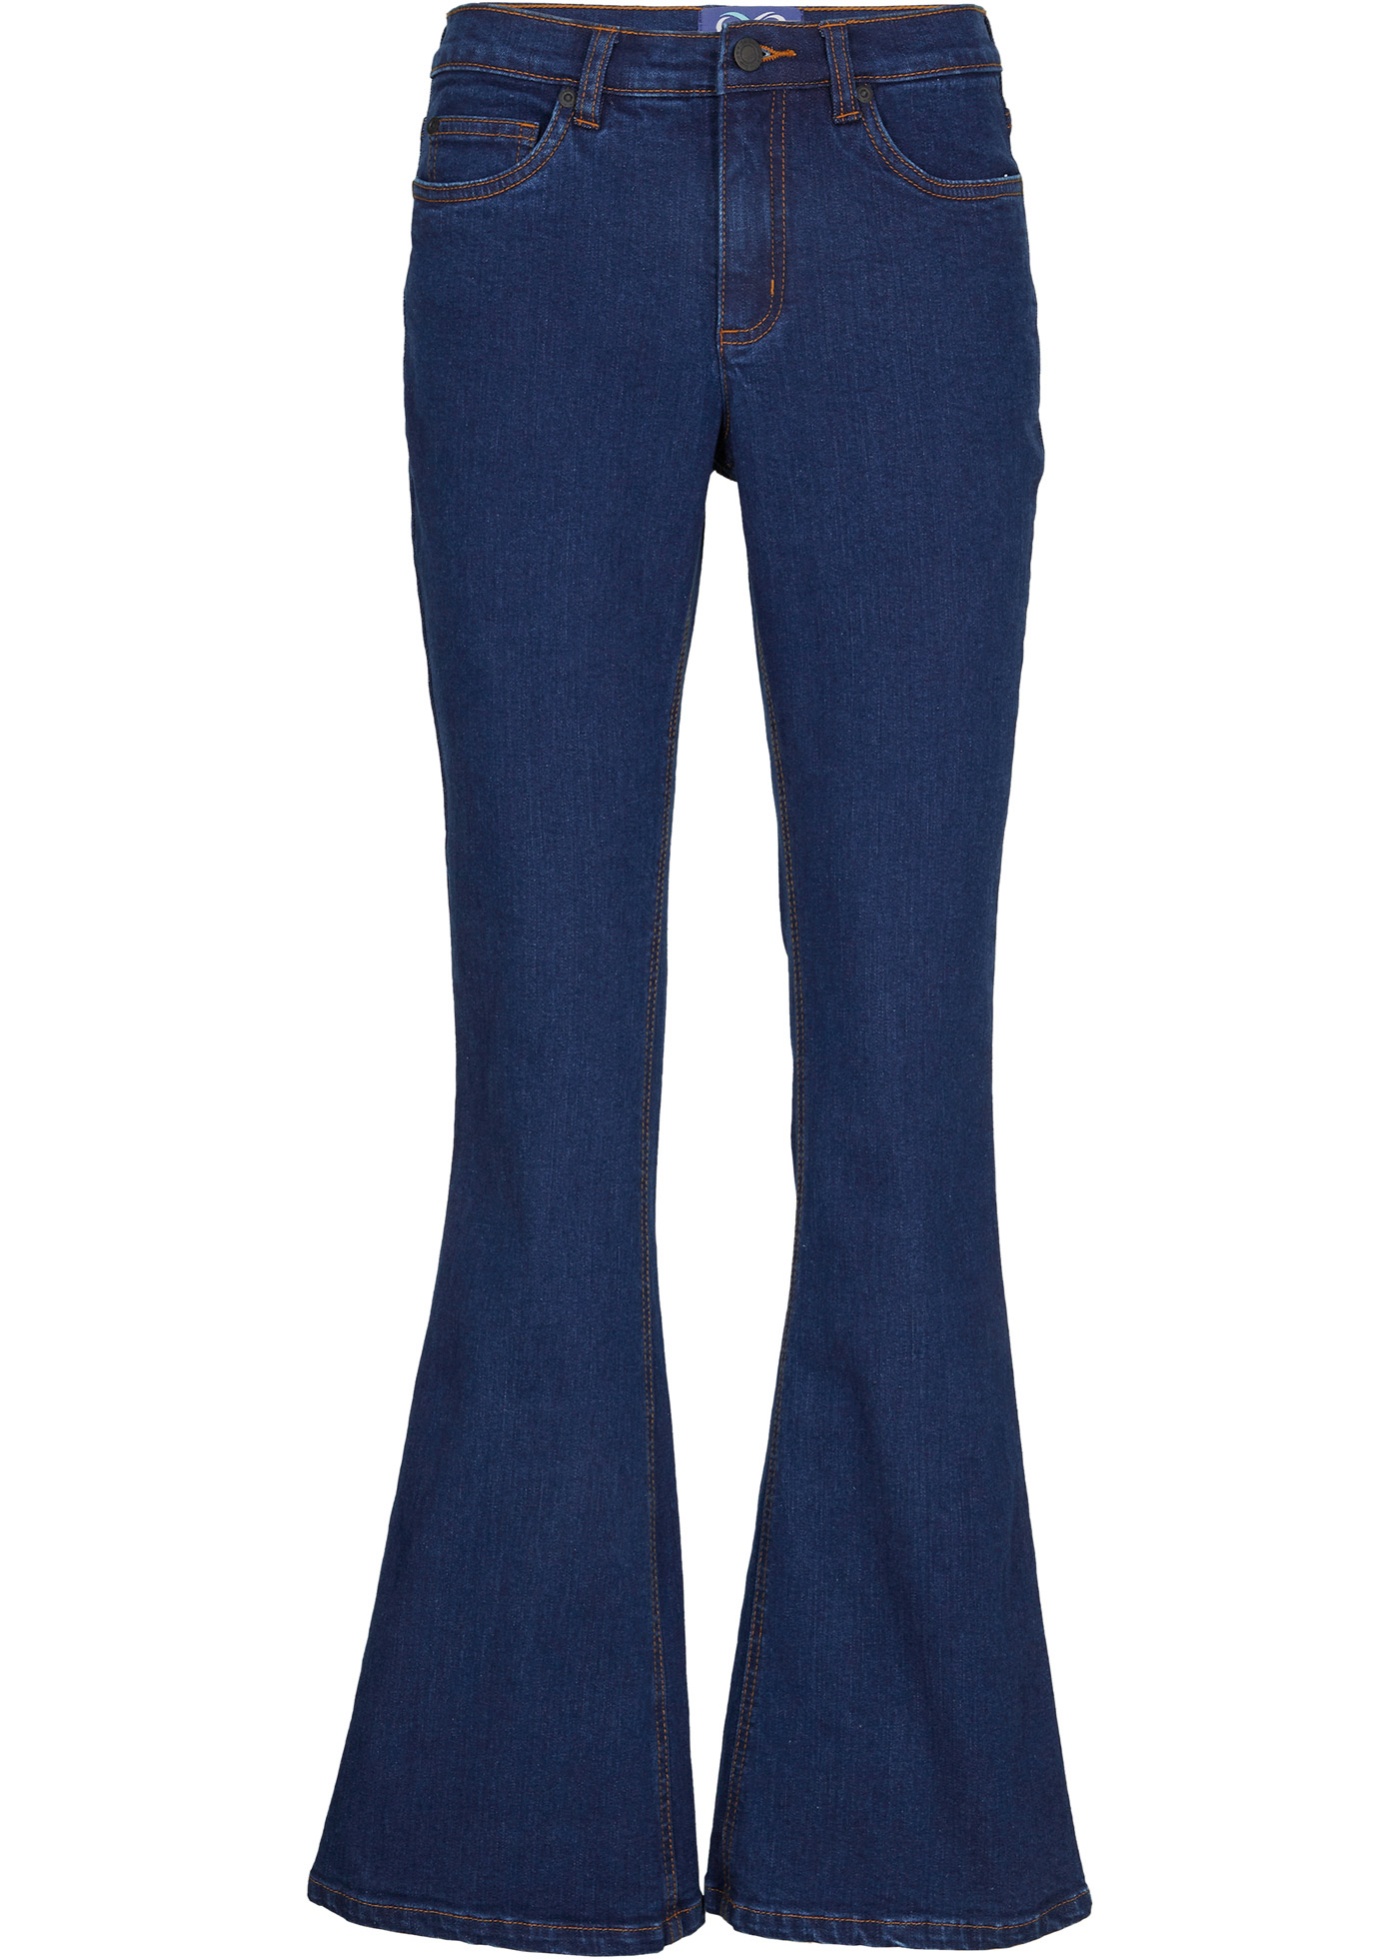 Essential stretch jeans flared